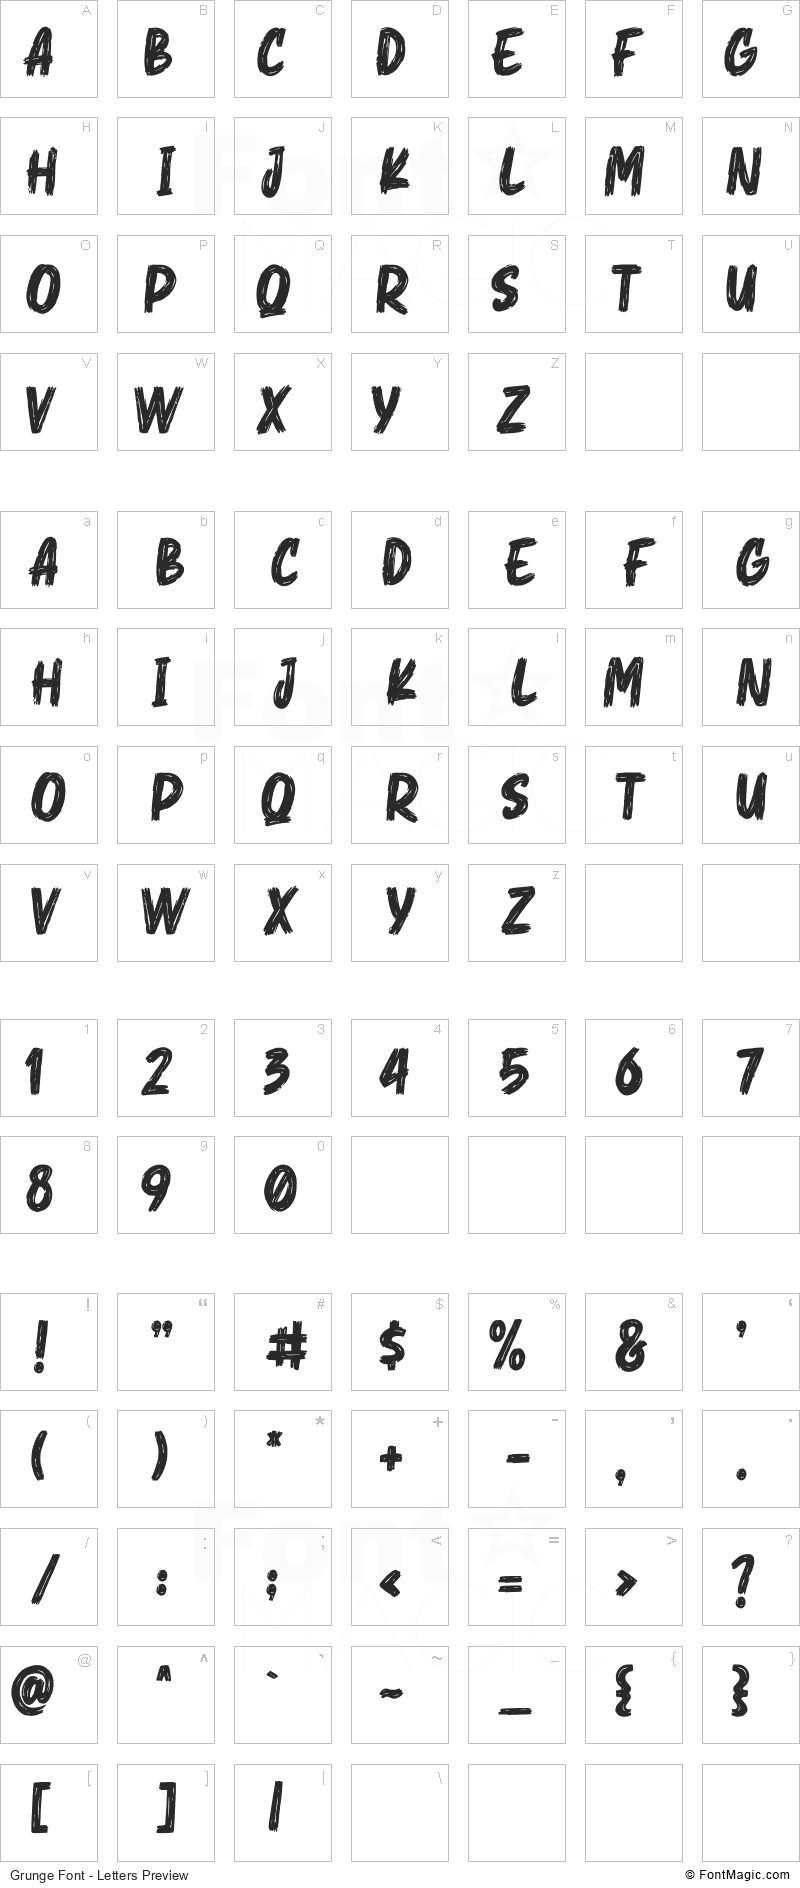 Grunge Font - All Latters Preview Chart